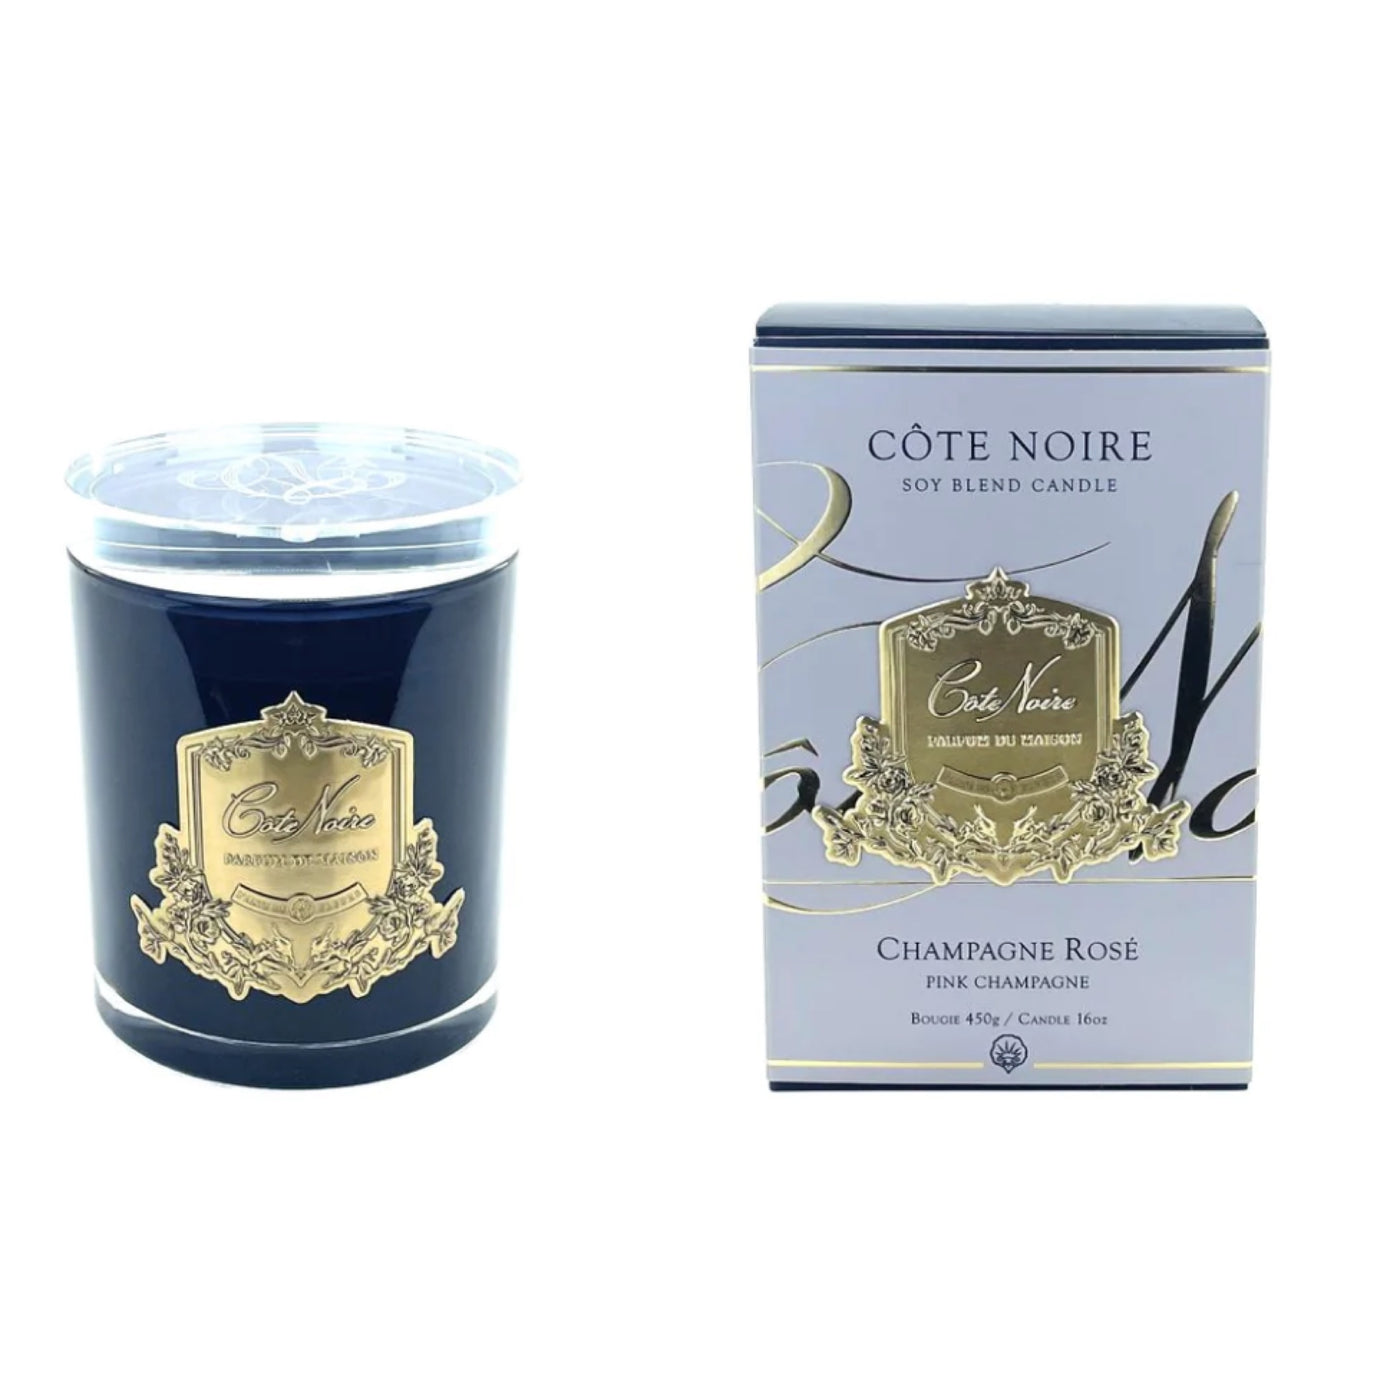 COTE NOIRE-PINK CHAMPAGNE - GOLD BADGE CANDLES